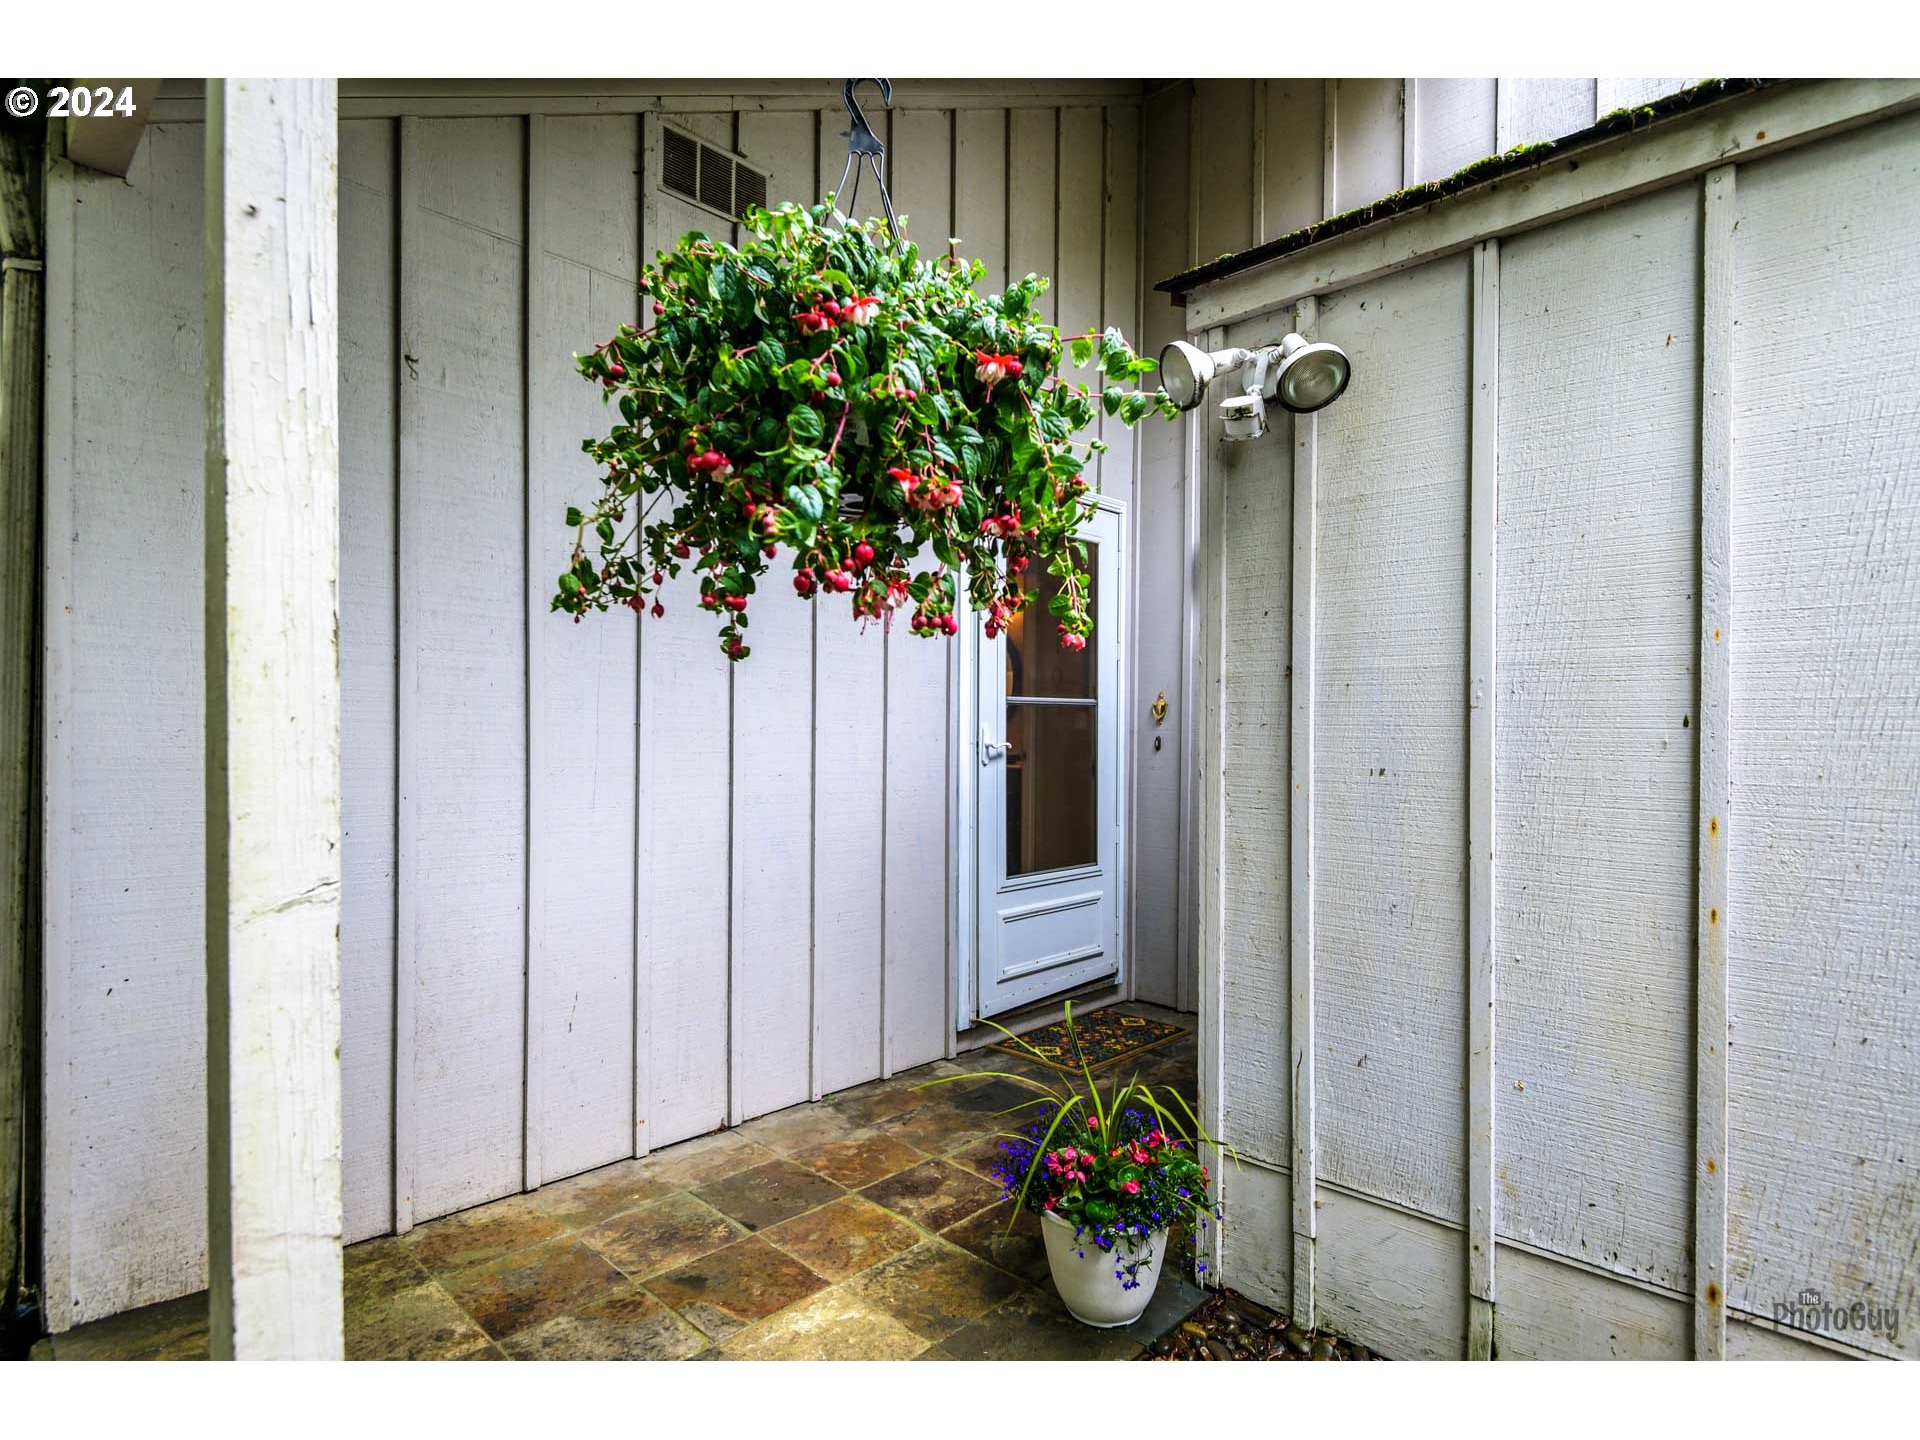 a view of a potted plant in front of a door